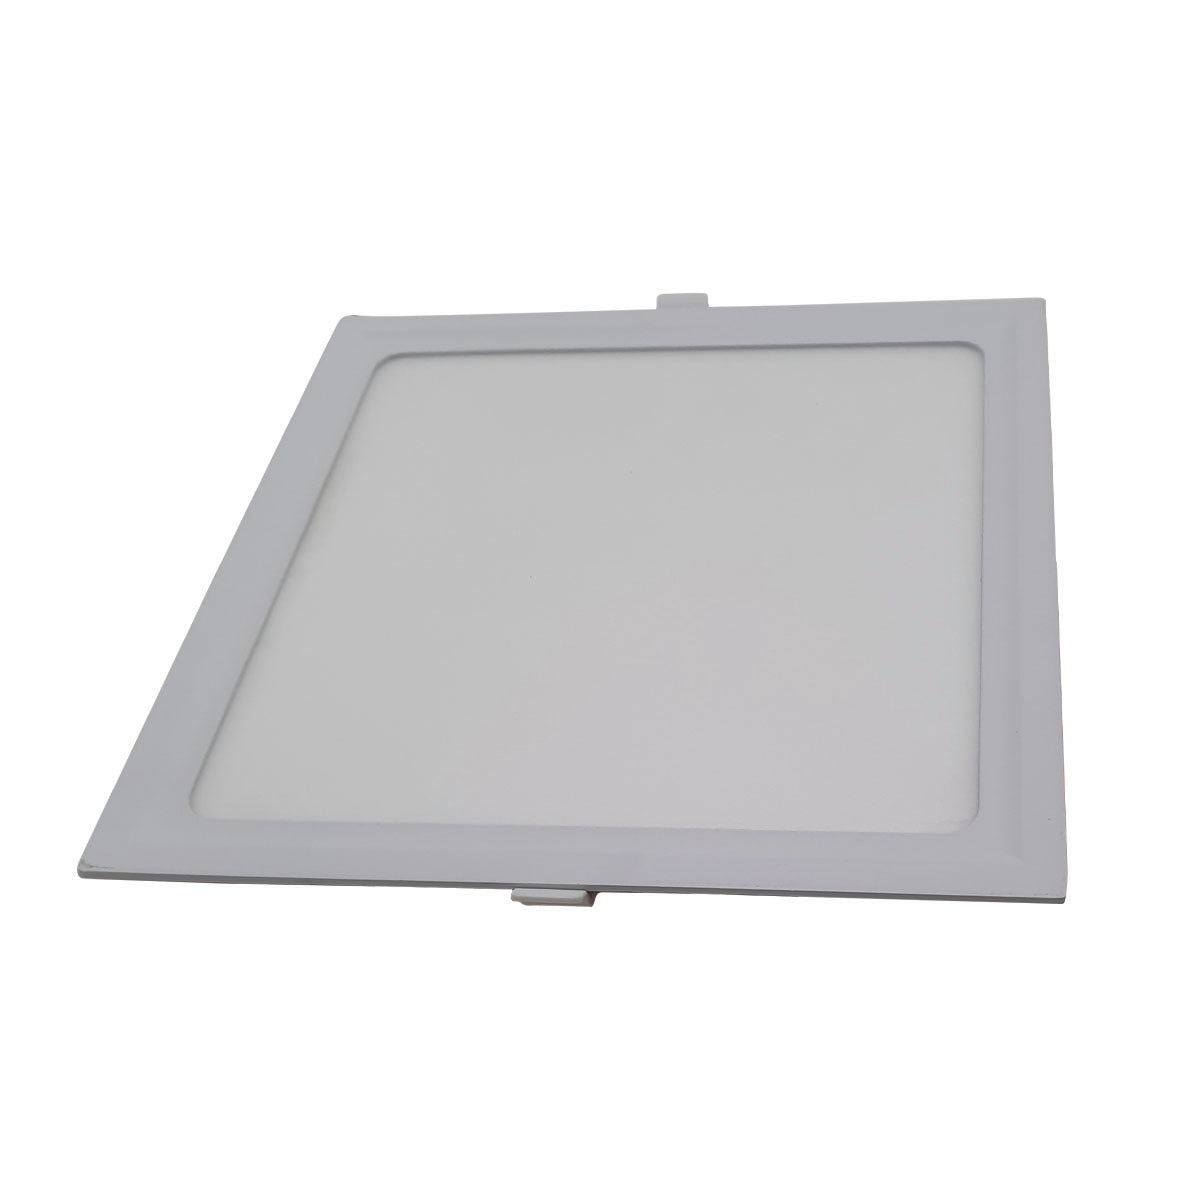 15W LED Recessed Square Panel Light Ceiling Down Light for Modern Residence Bright - Shop for LED lights - Transformers - Lampshades - Holders | Electricalsone UK